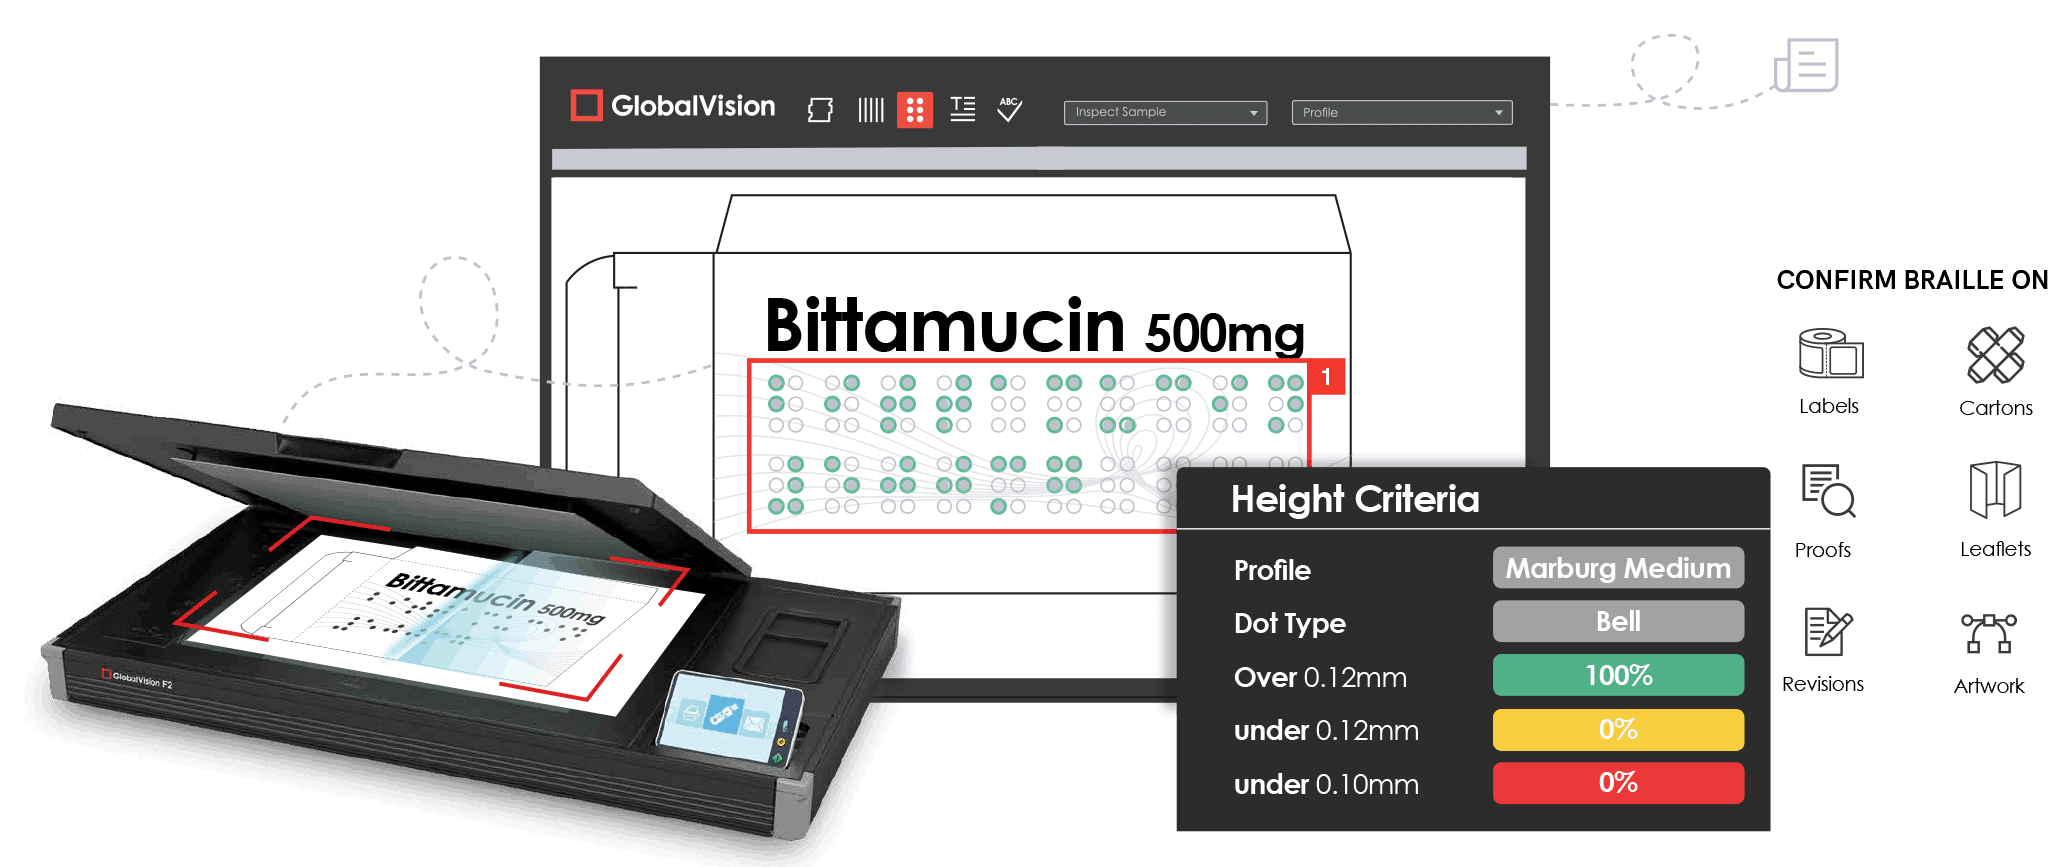 Sample view of Braille inspection being scanned and displayed in the GlobalVision GUI. Overlaid by sample data on Braille Height criteria